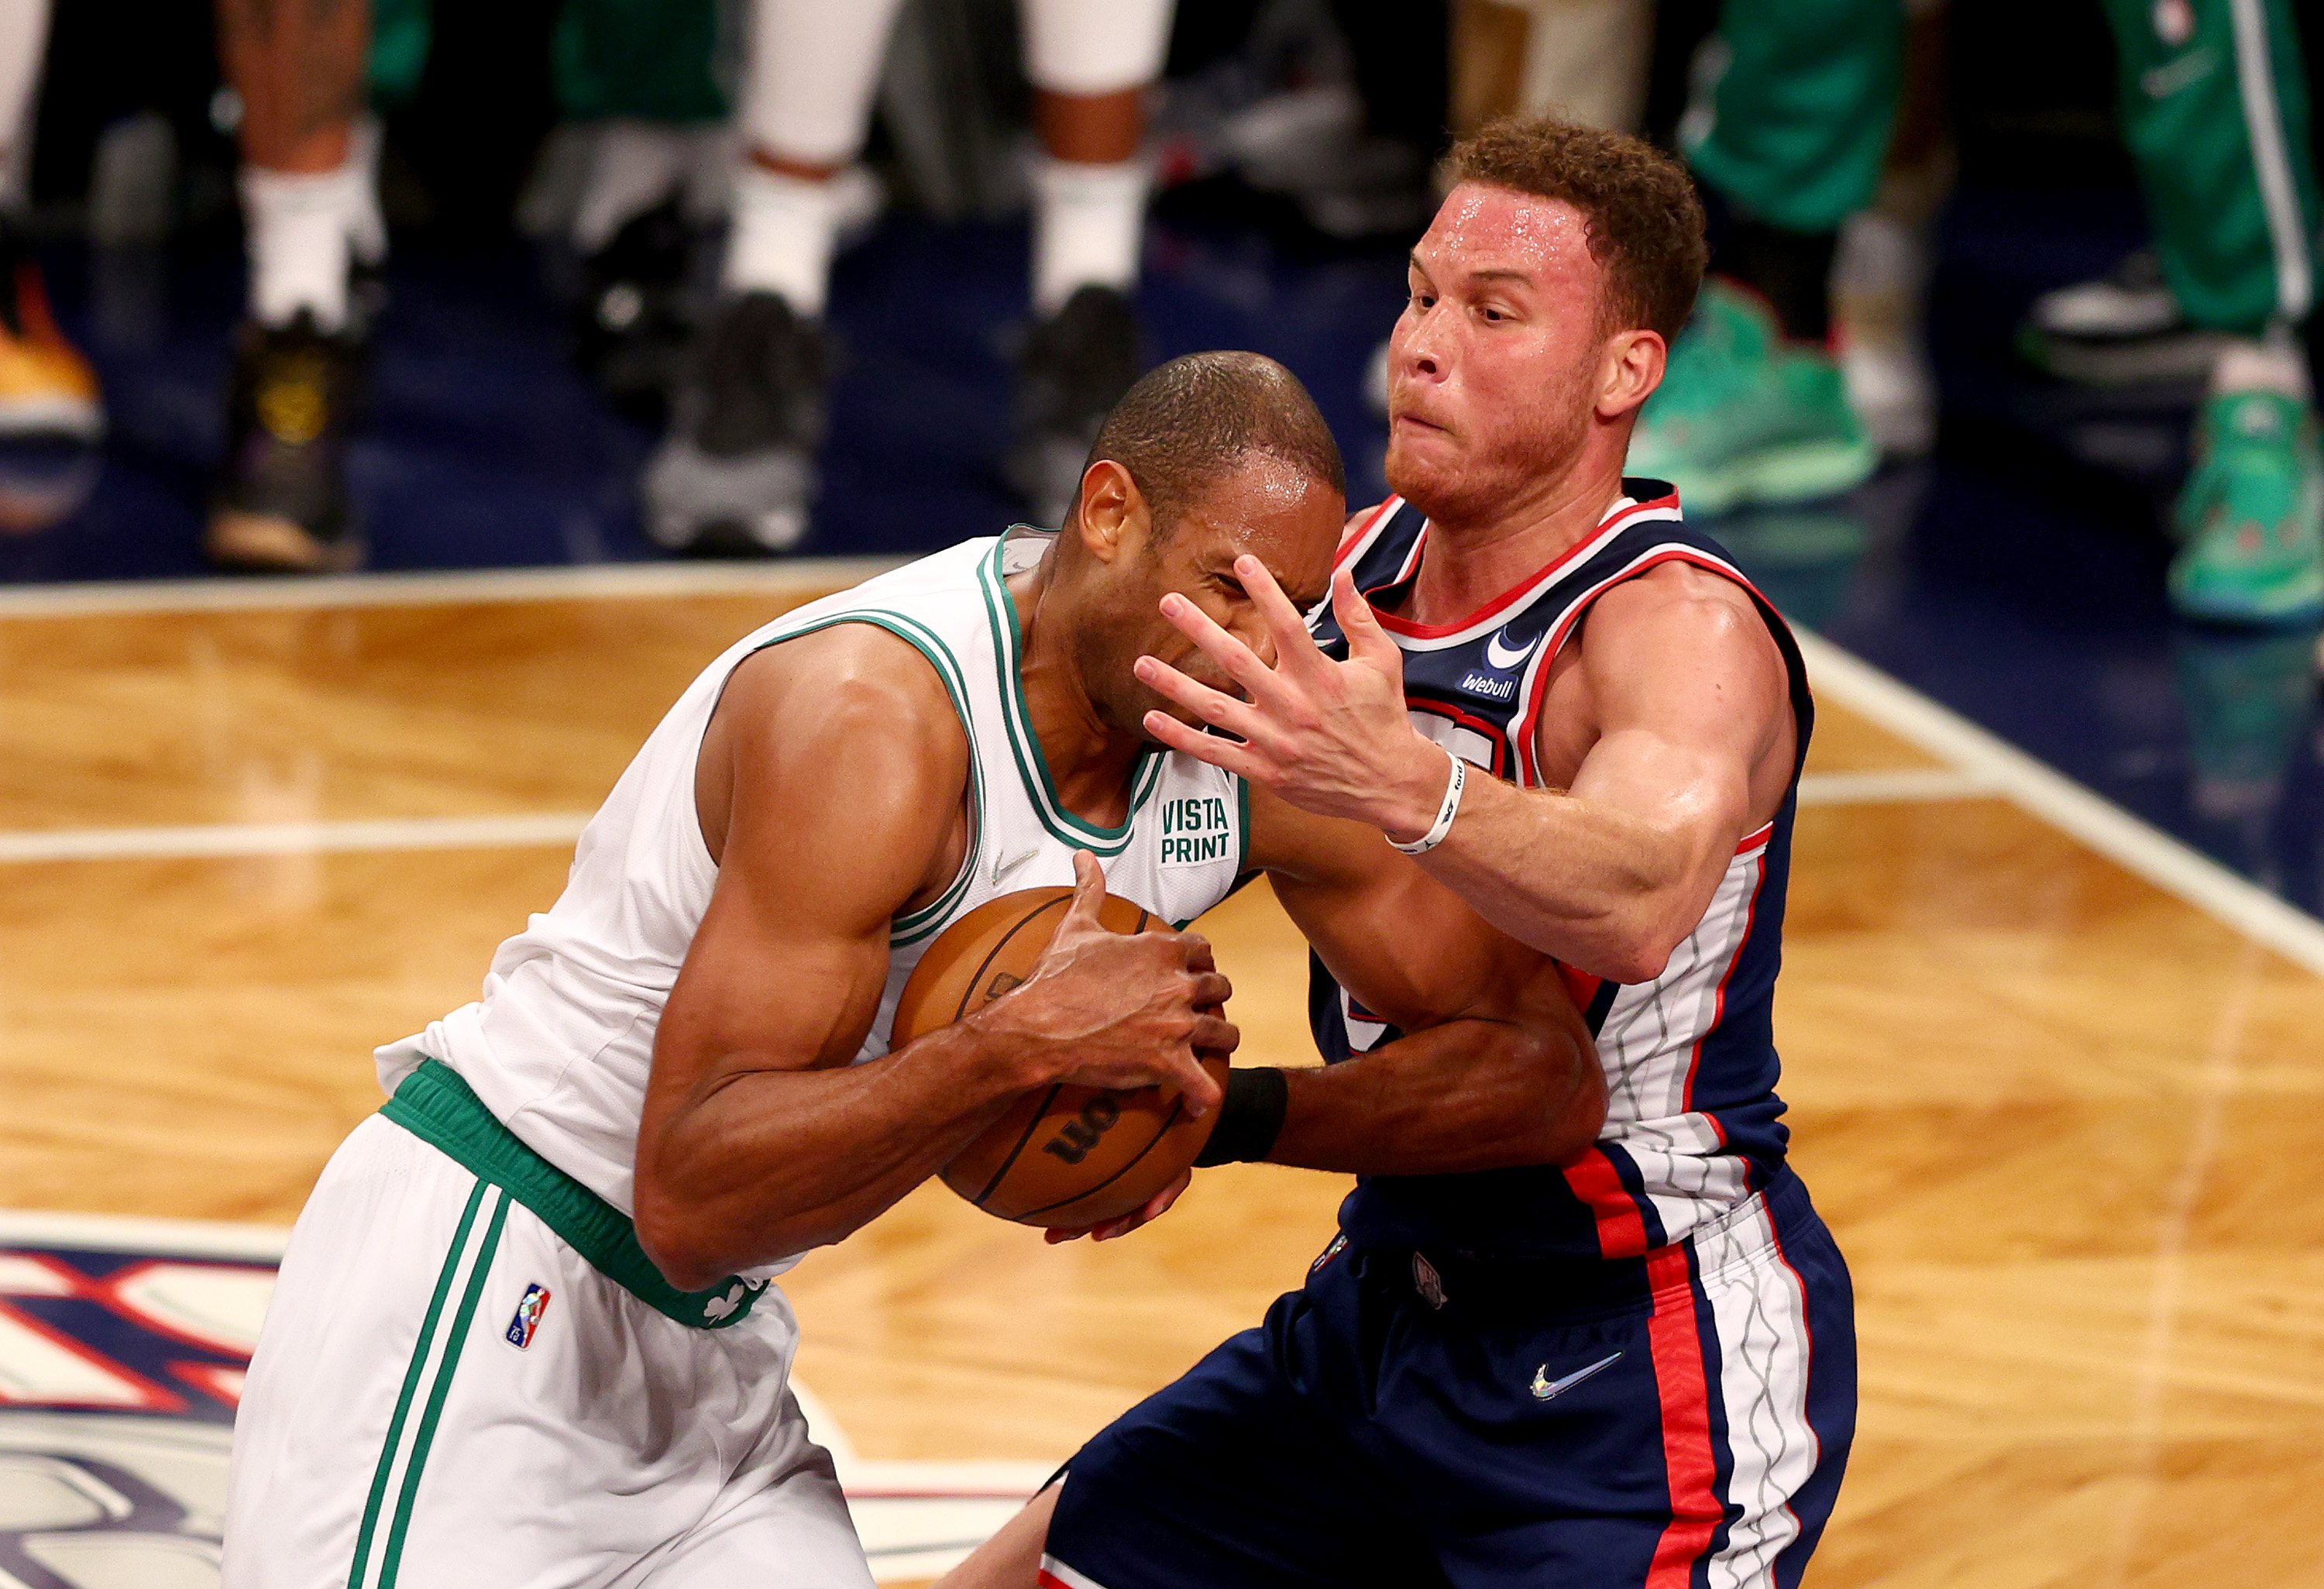 Blake Griffin's Dennis Rodman move is a first in Celtics history